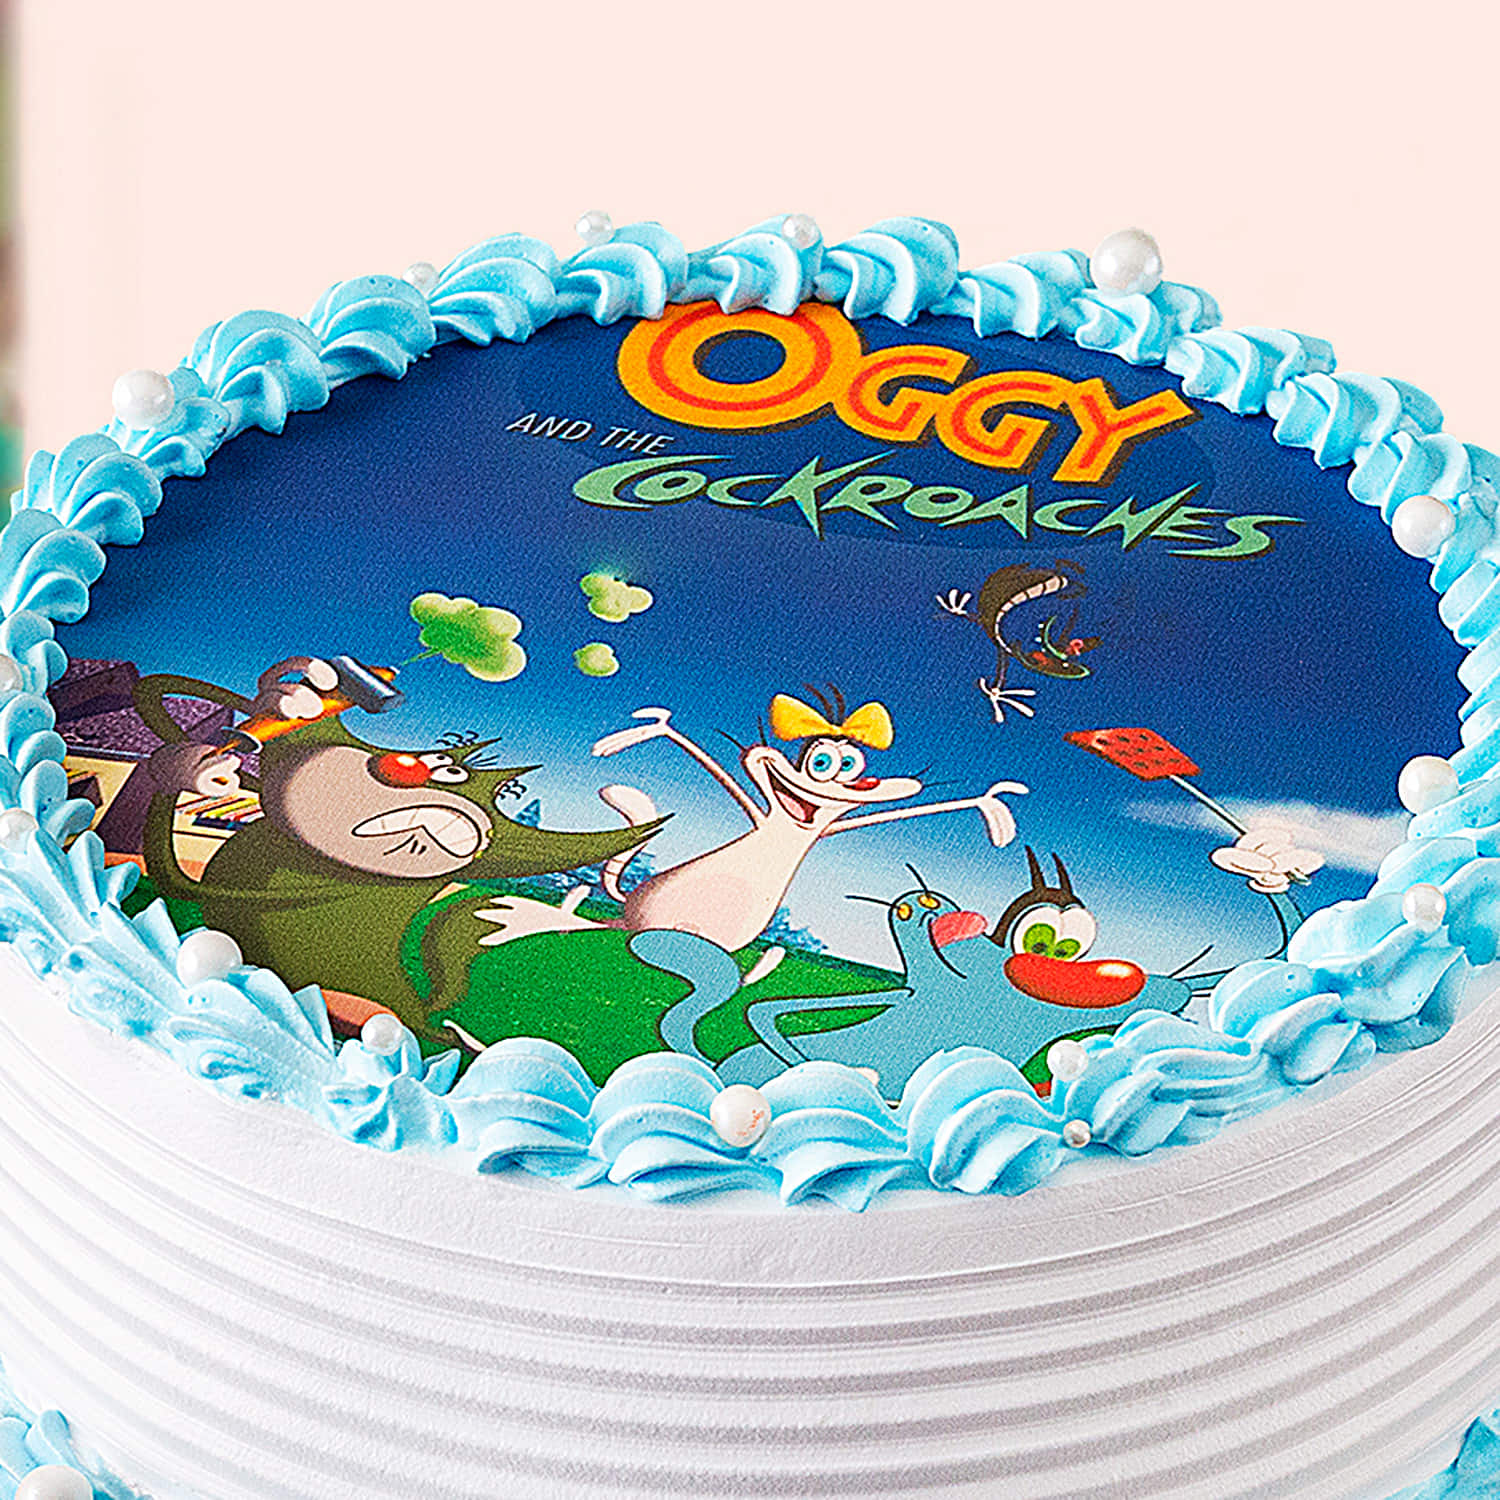 Album Oggy cake from Oggy & the cockroach from Baked By In